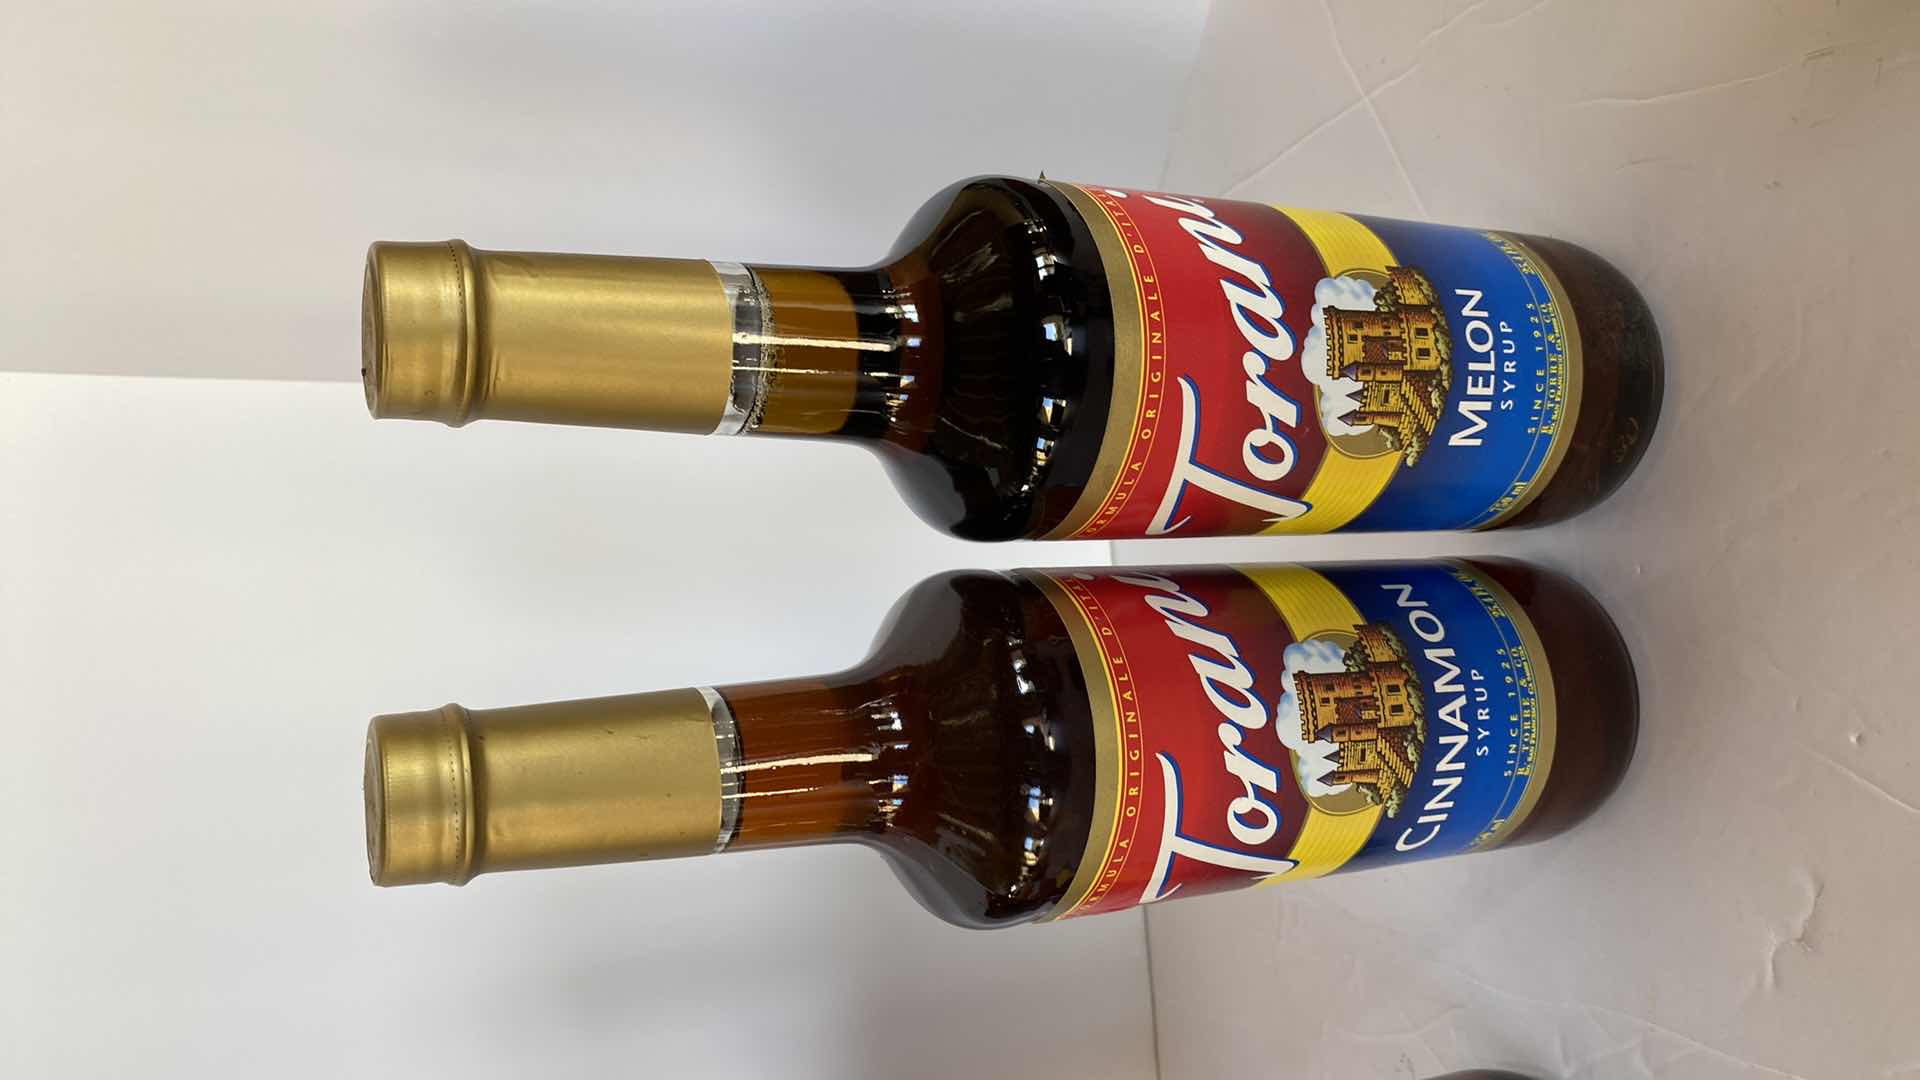 Photo 3 of TORANI CHOCOLATE SAUCE AND 4 SYRUPS UNKNOWN EXPIRATION DATES